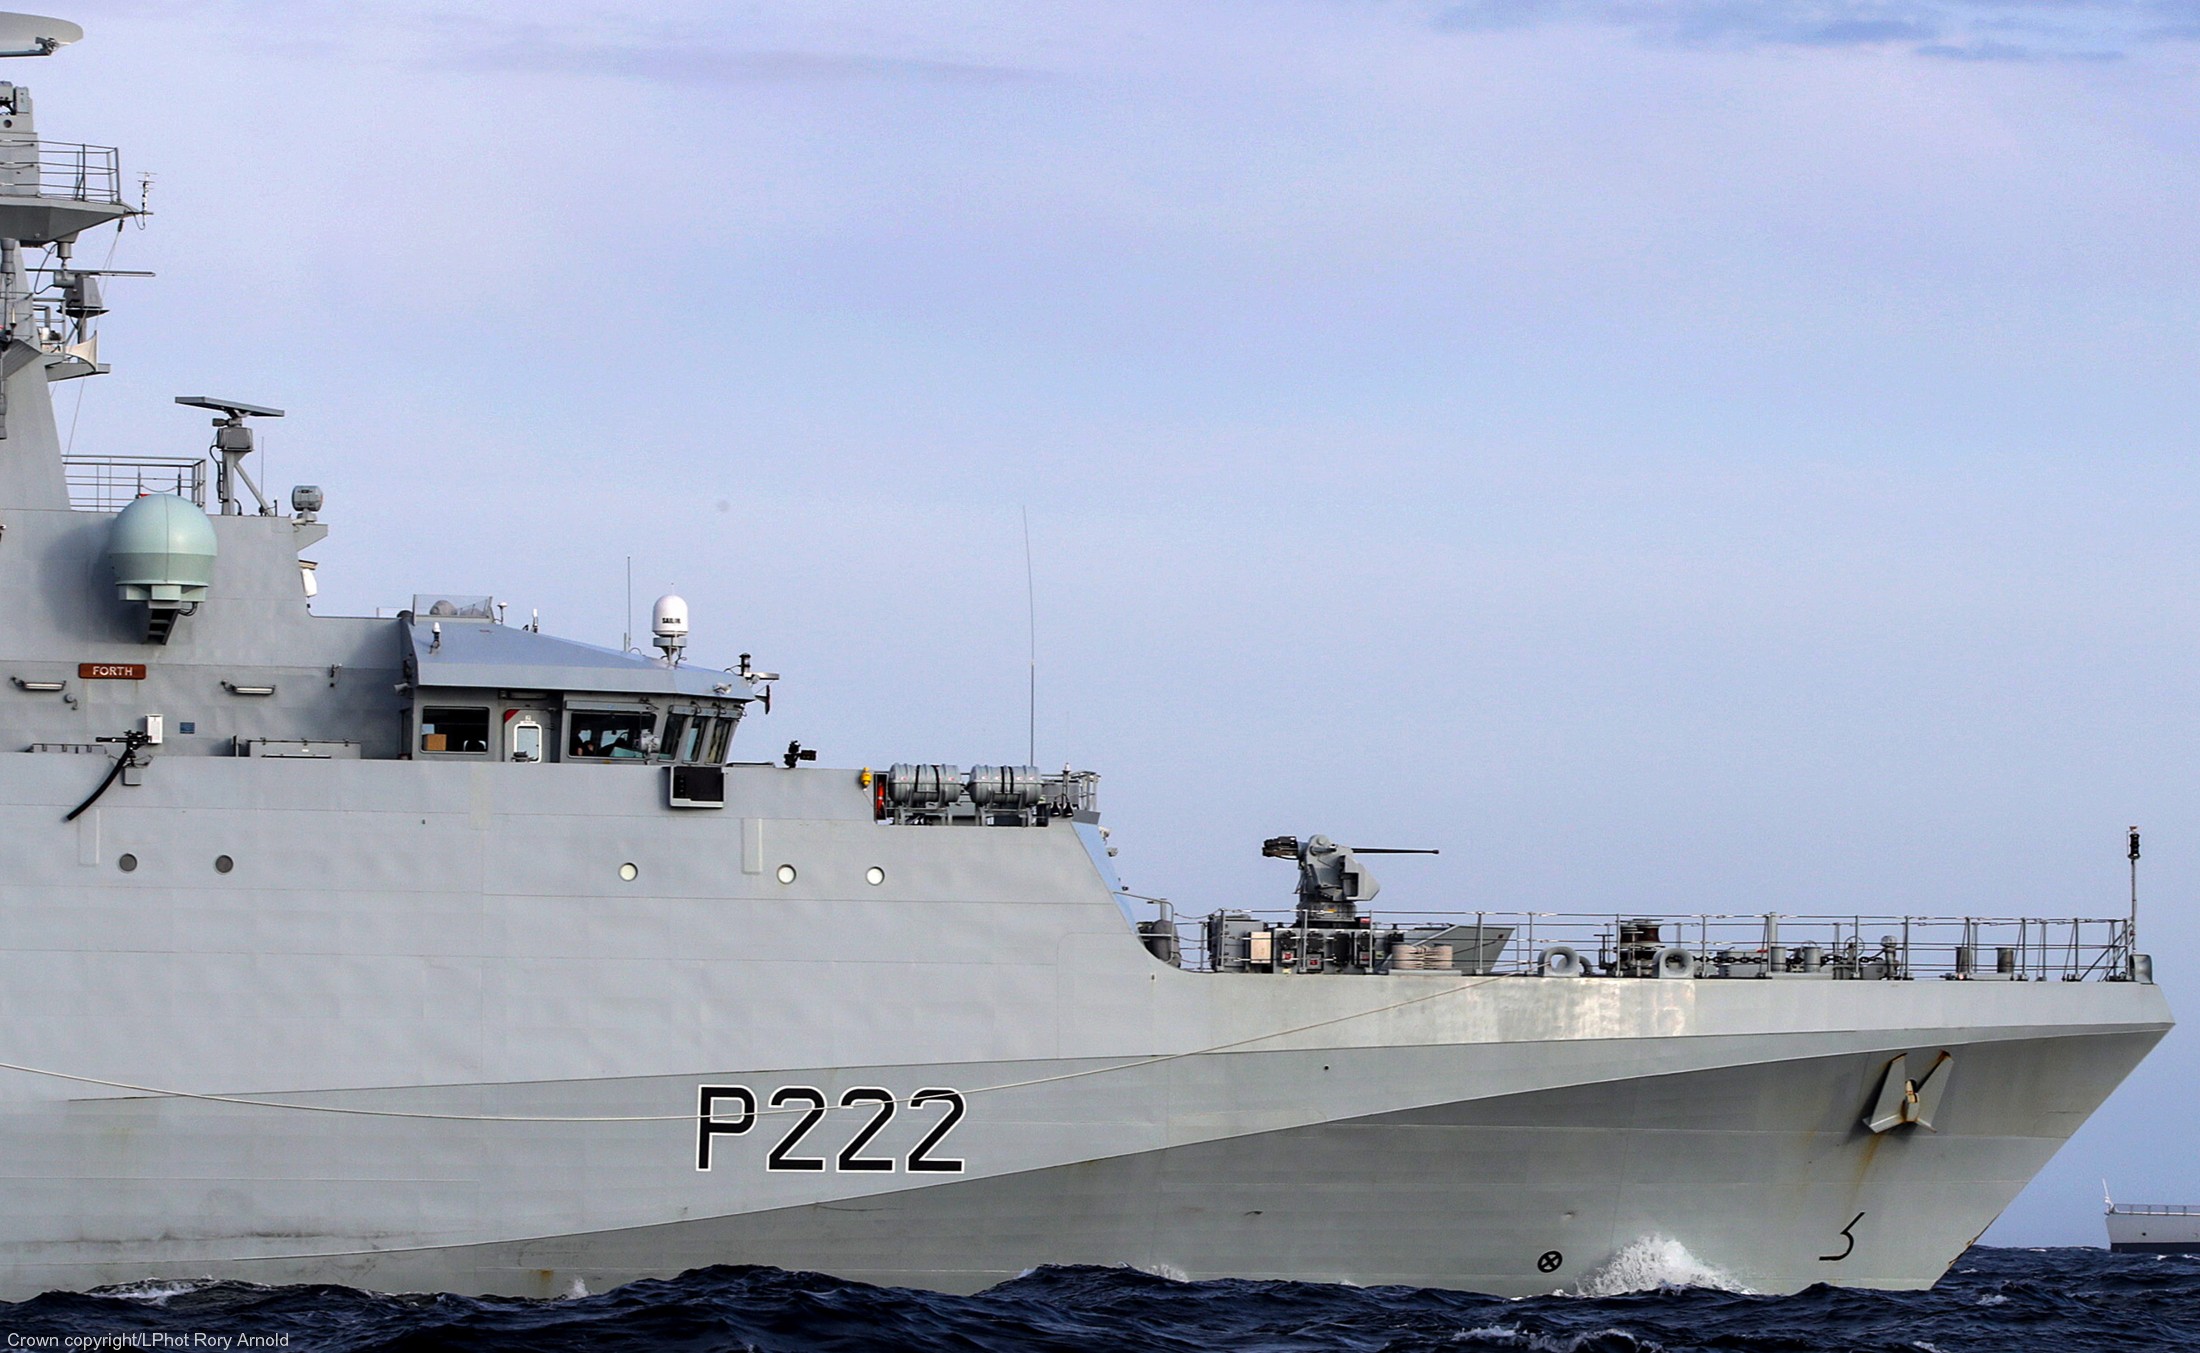 p222 hms forth river class offshore patrol vessel opv royal navy 12